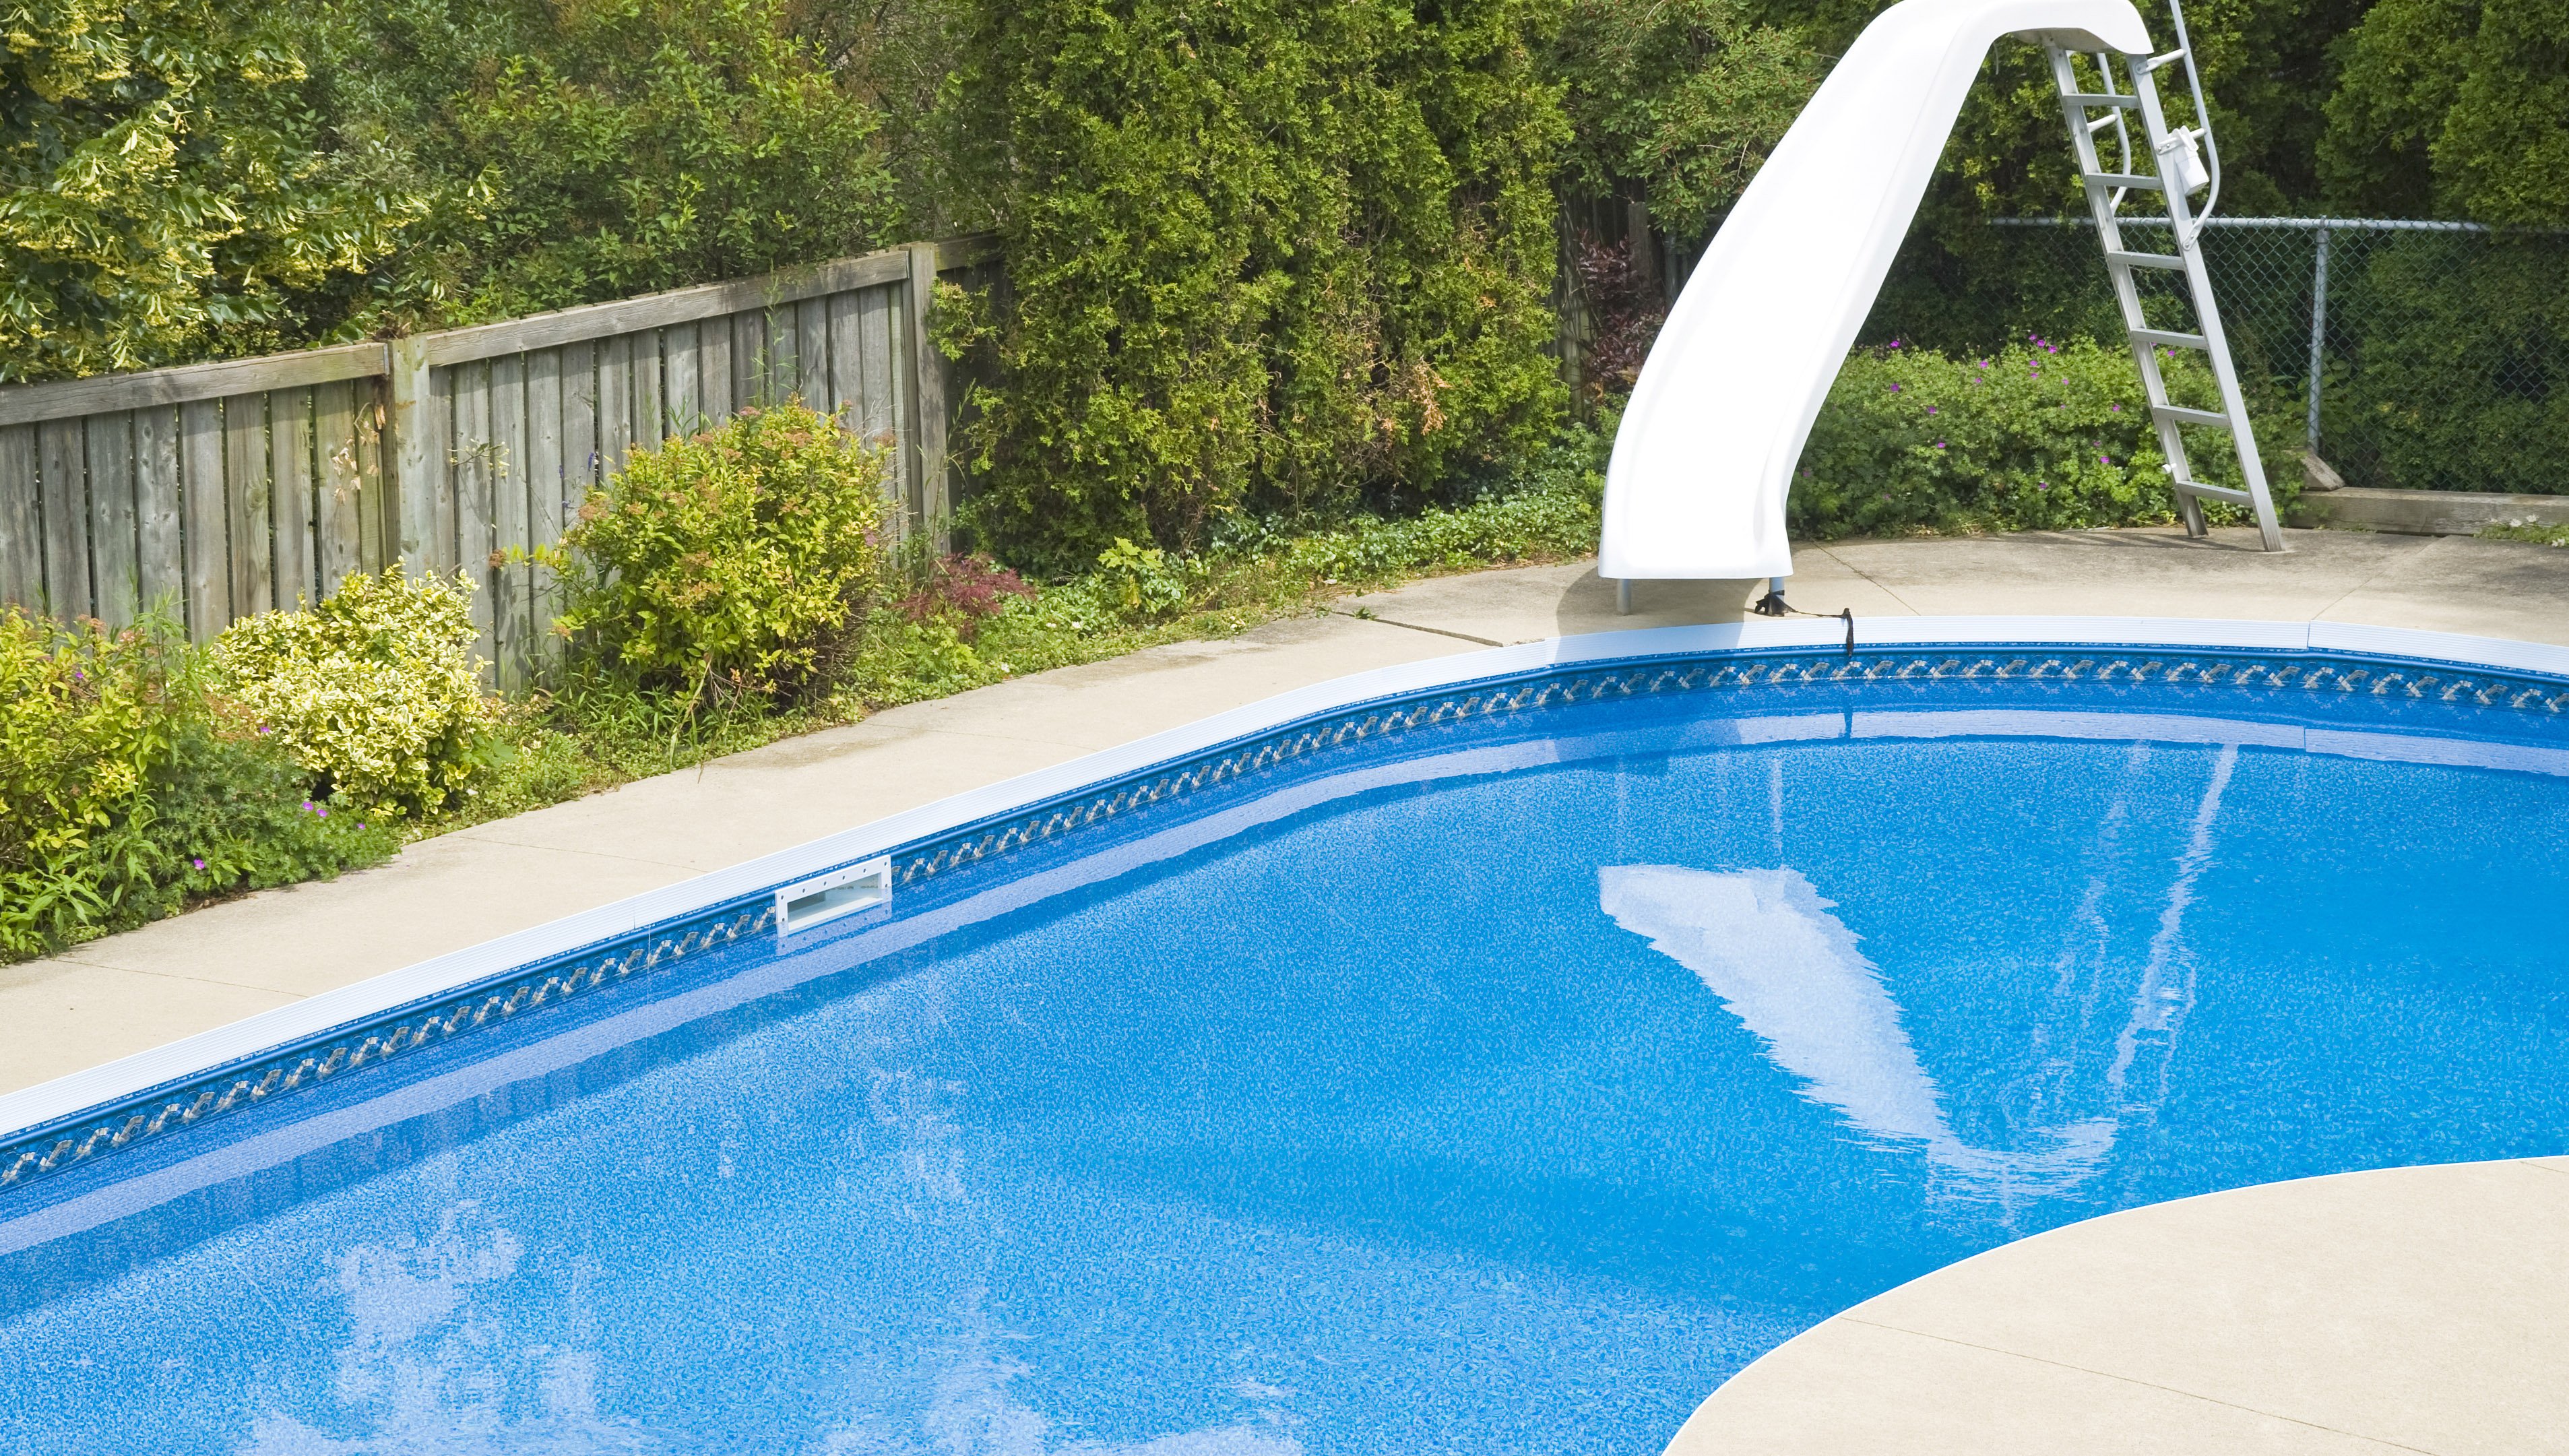 10 Things You Need to Know Before You Install a Vinyl Pool